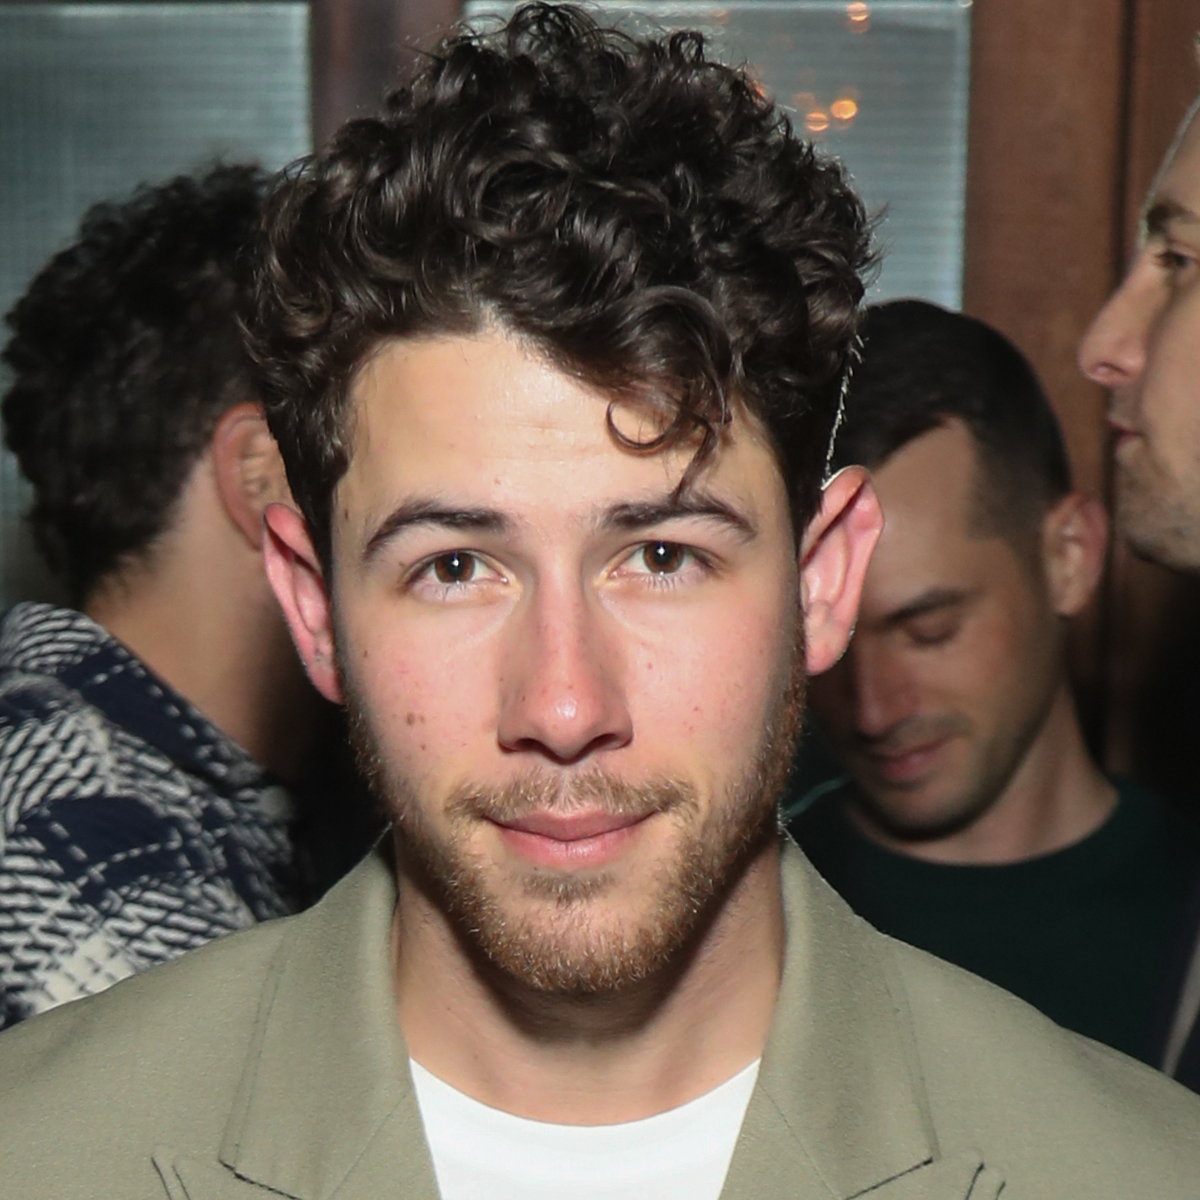 Nick Jonas Keeps His Cool After Falling in Hole Onstage During Concert